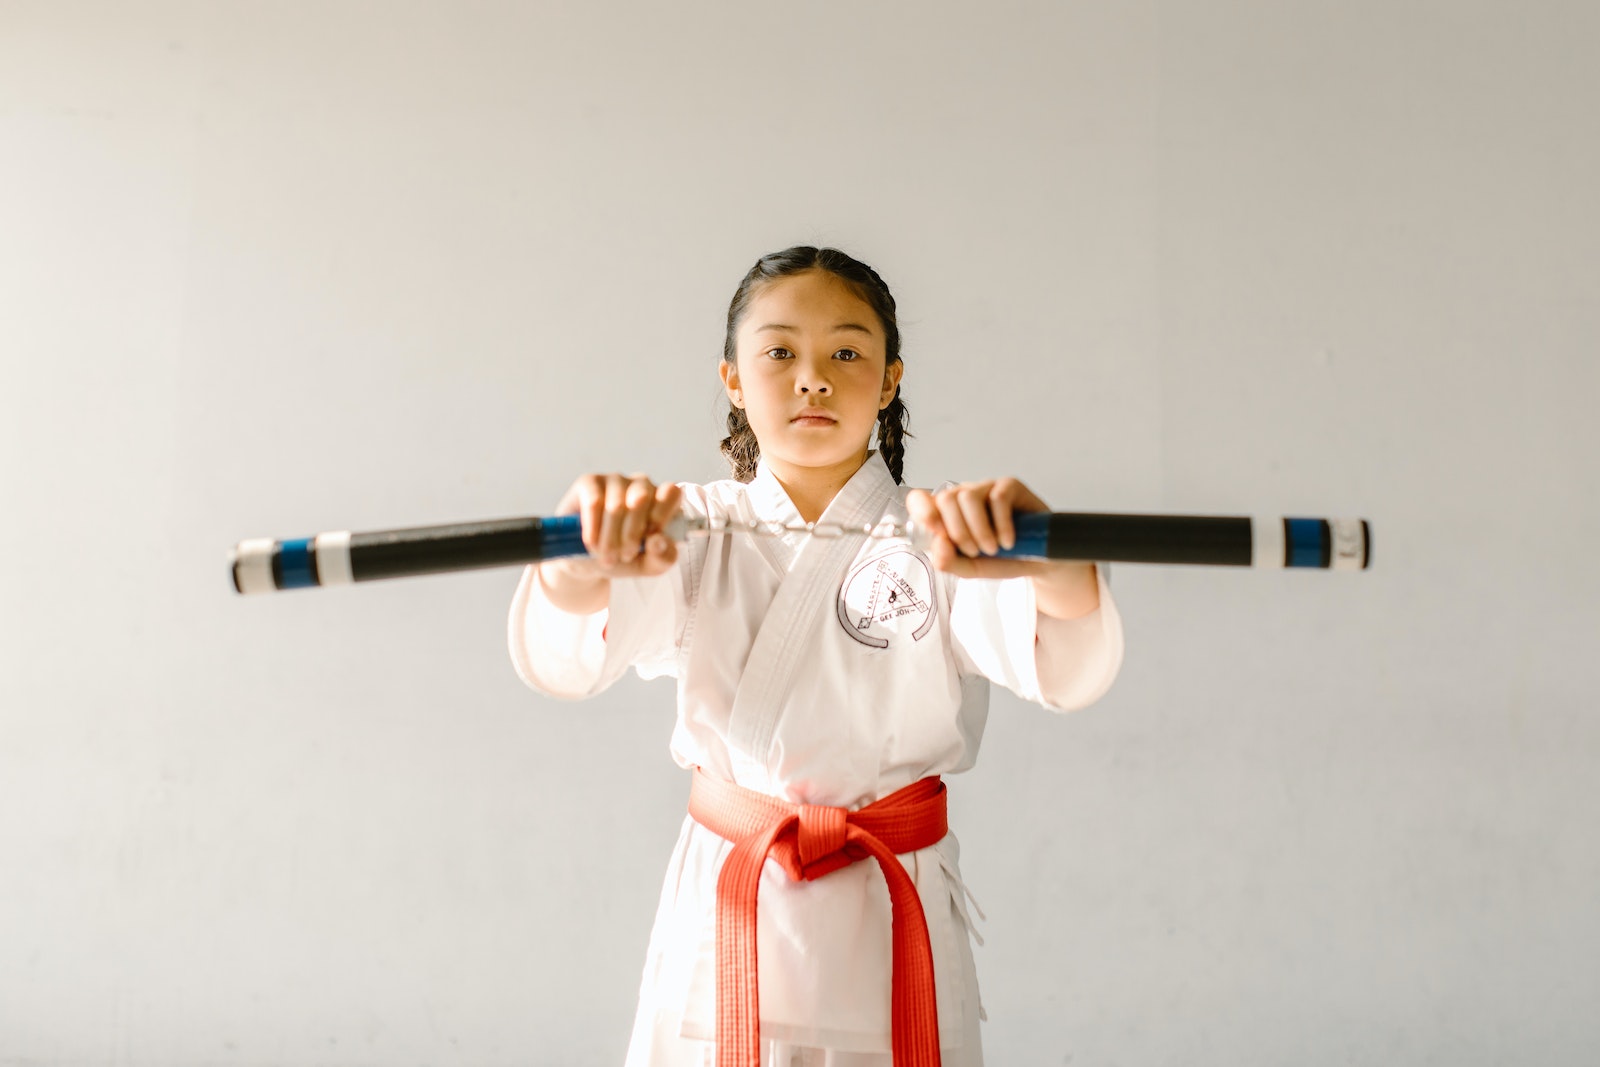 A Girl with Red Belt Holding a Nunchaku